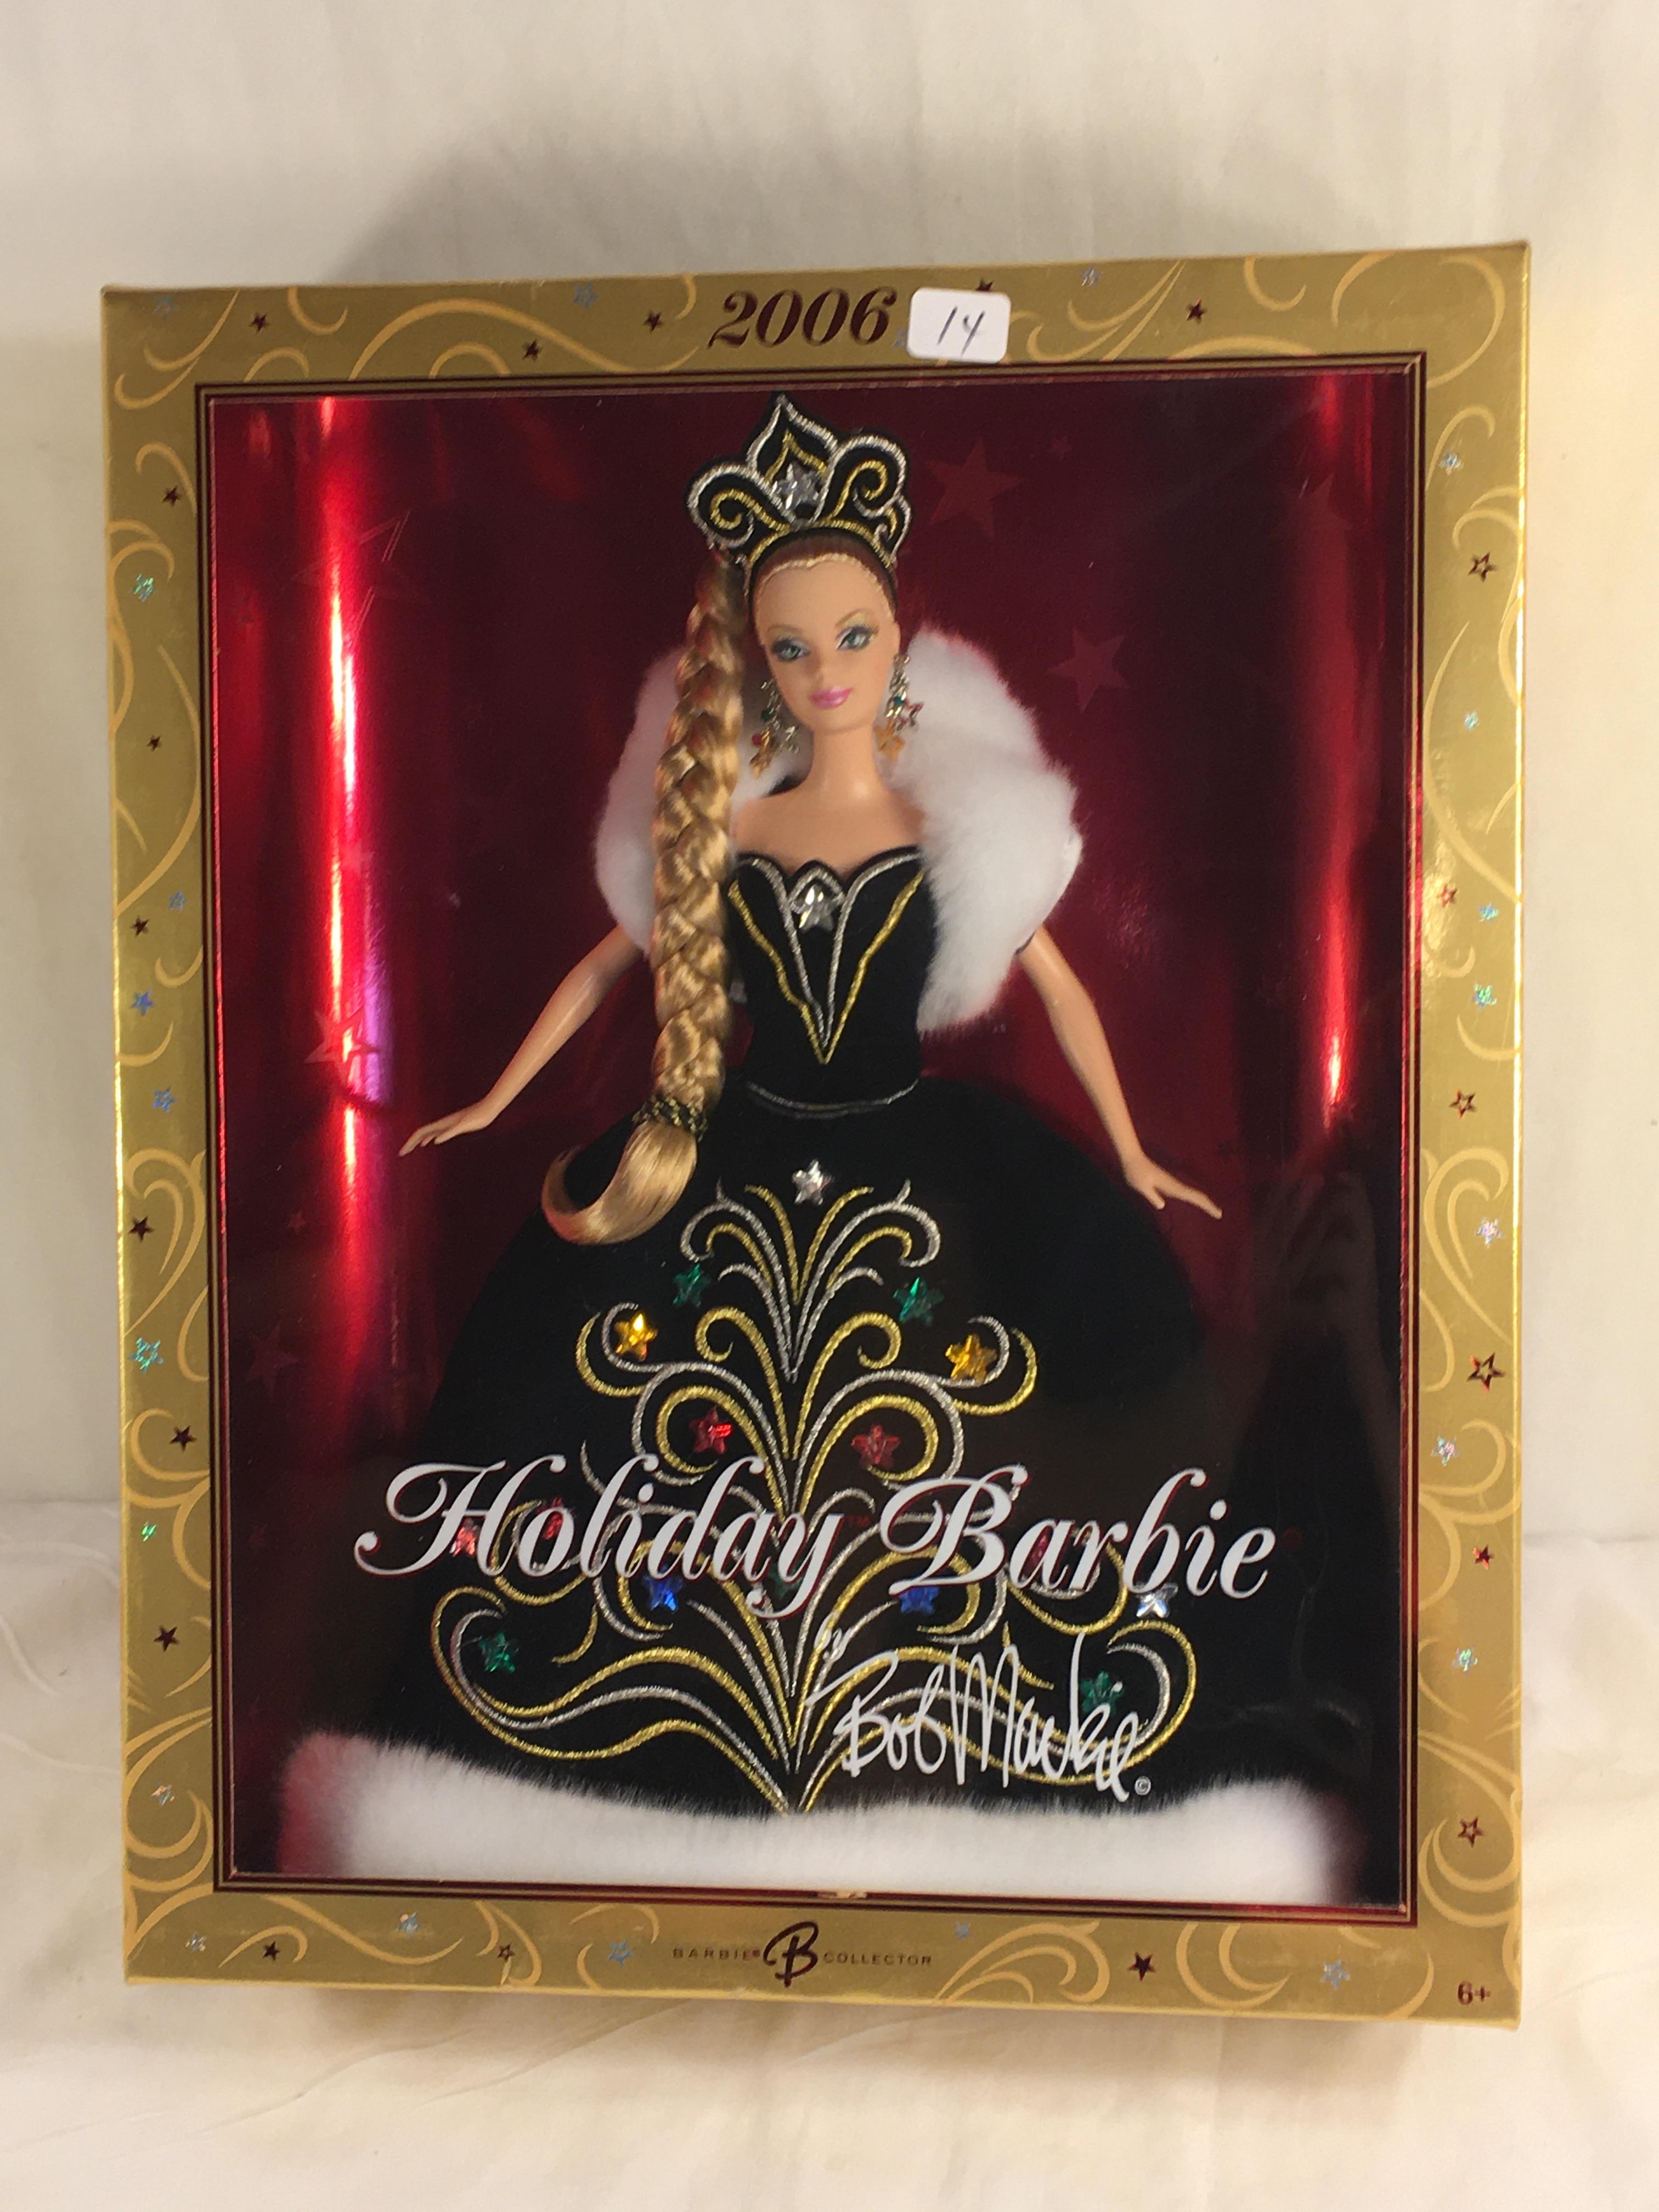 Collector NIP 2006 Mattel Holiday Celebration Barbie Doll 11-12" Tall Doll - See Pictures